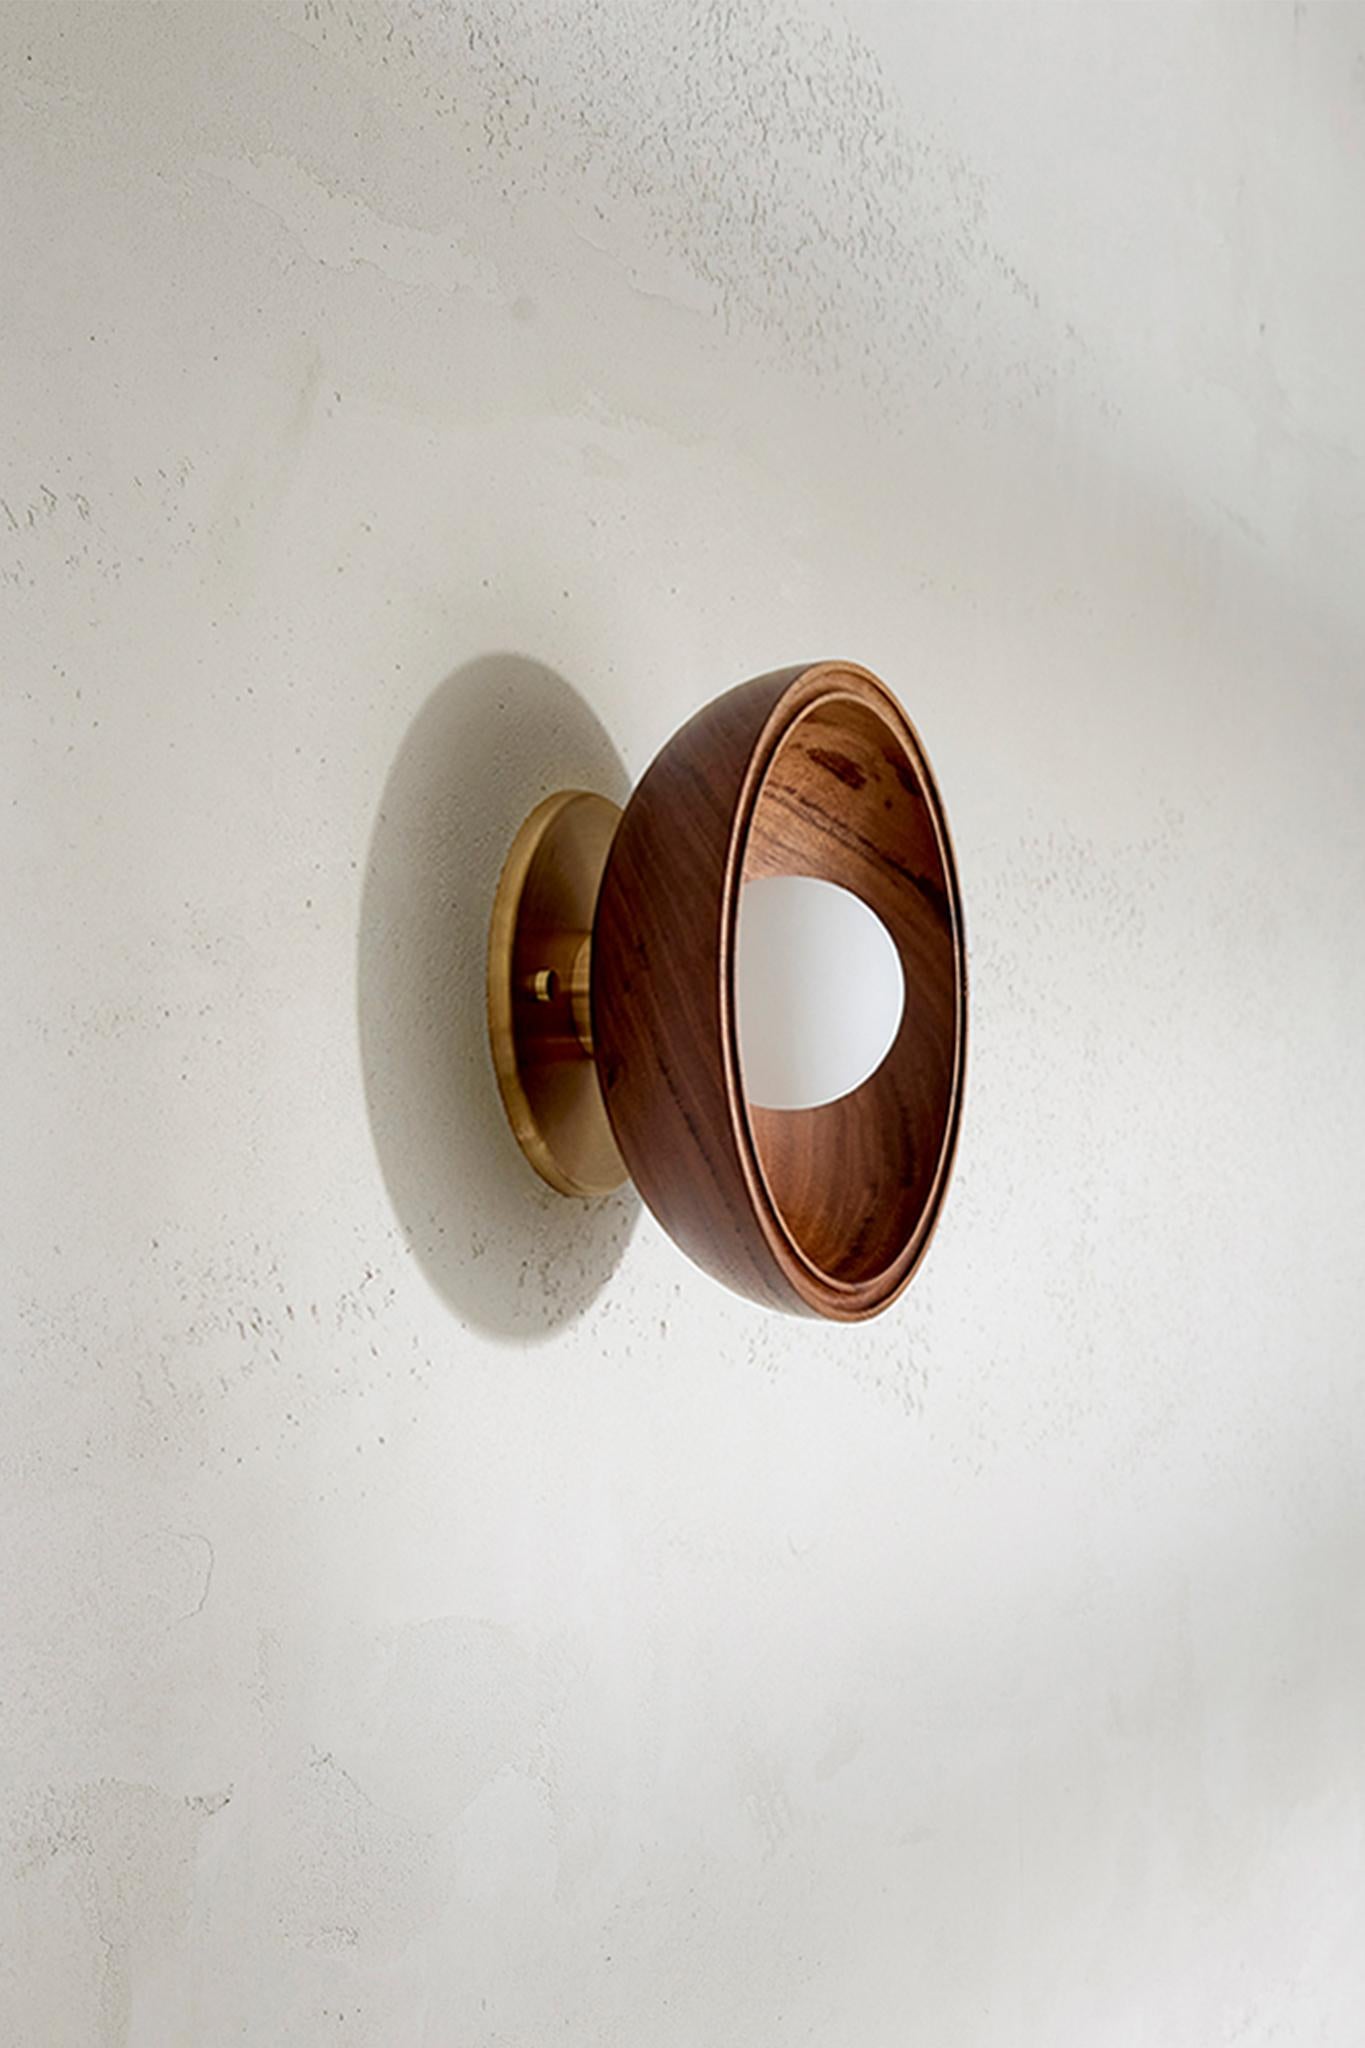  The Selene Surface Sconce has been inversely repurposed from the FSC-certified timber of our Terra 00 range. Suitable as a wall light or ceiling light in both residential and commercial projects, the Selene Surface Sconce offers a tactile warmth